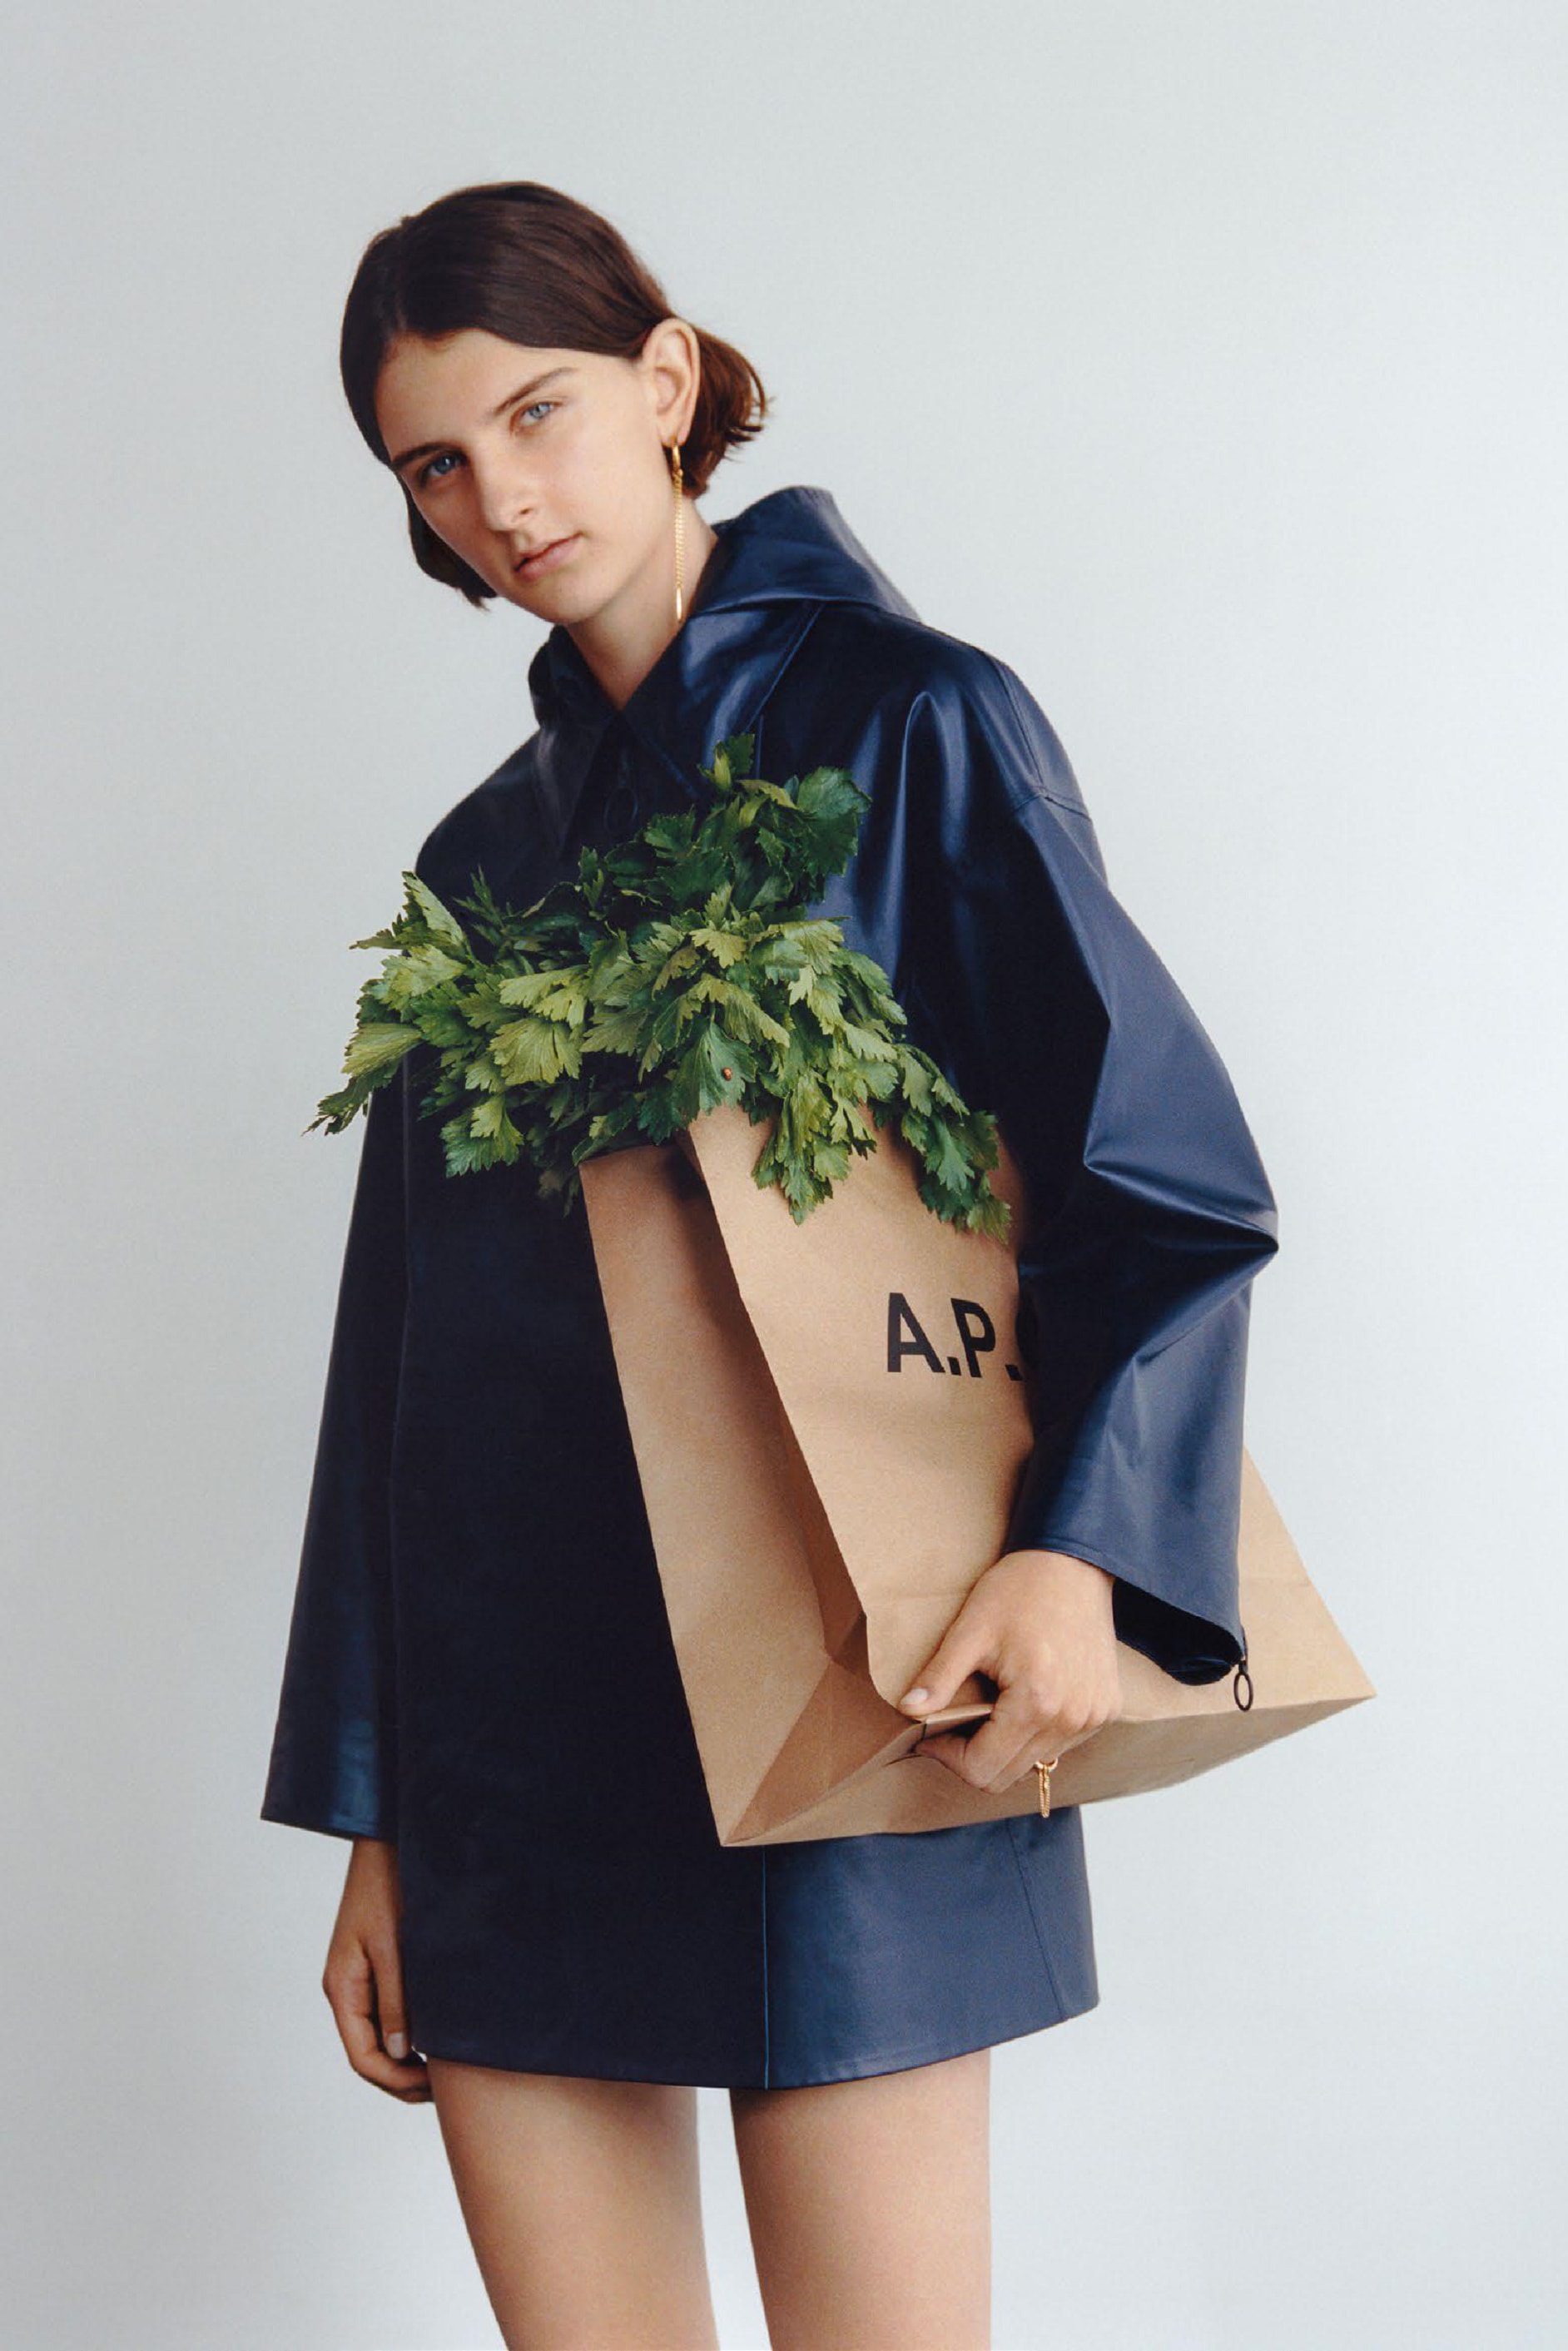 A.P.C. Spring 2018 Lookbook Collection Minimal Aesthetic Basic Staple Pieces